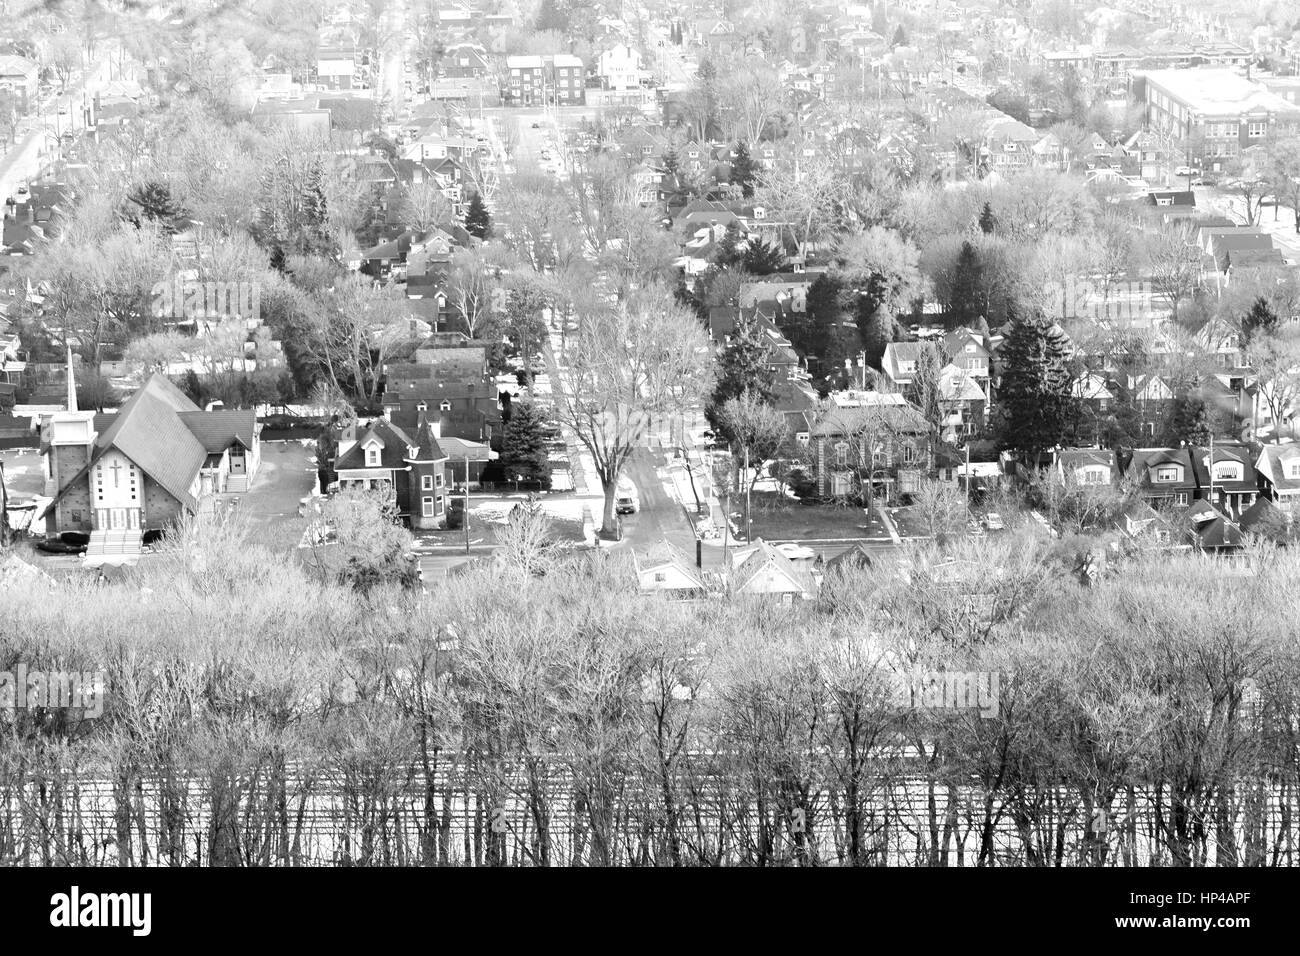 Quaint mature community urban neighbourhood nestled among winter trees, seen from above in black and white Stock Photo